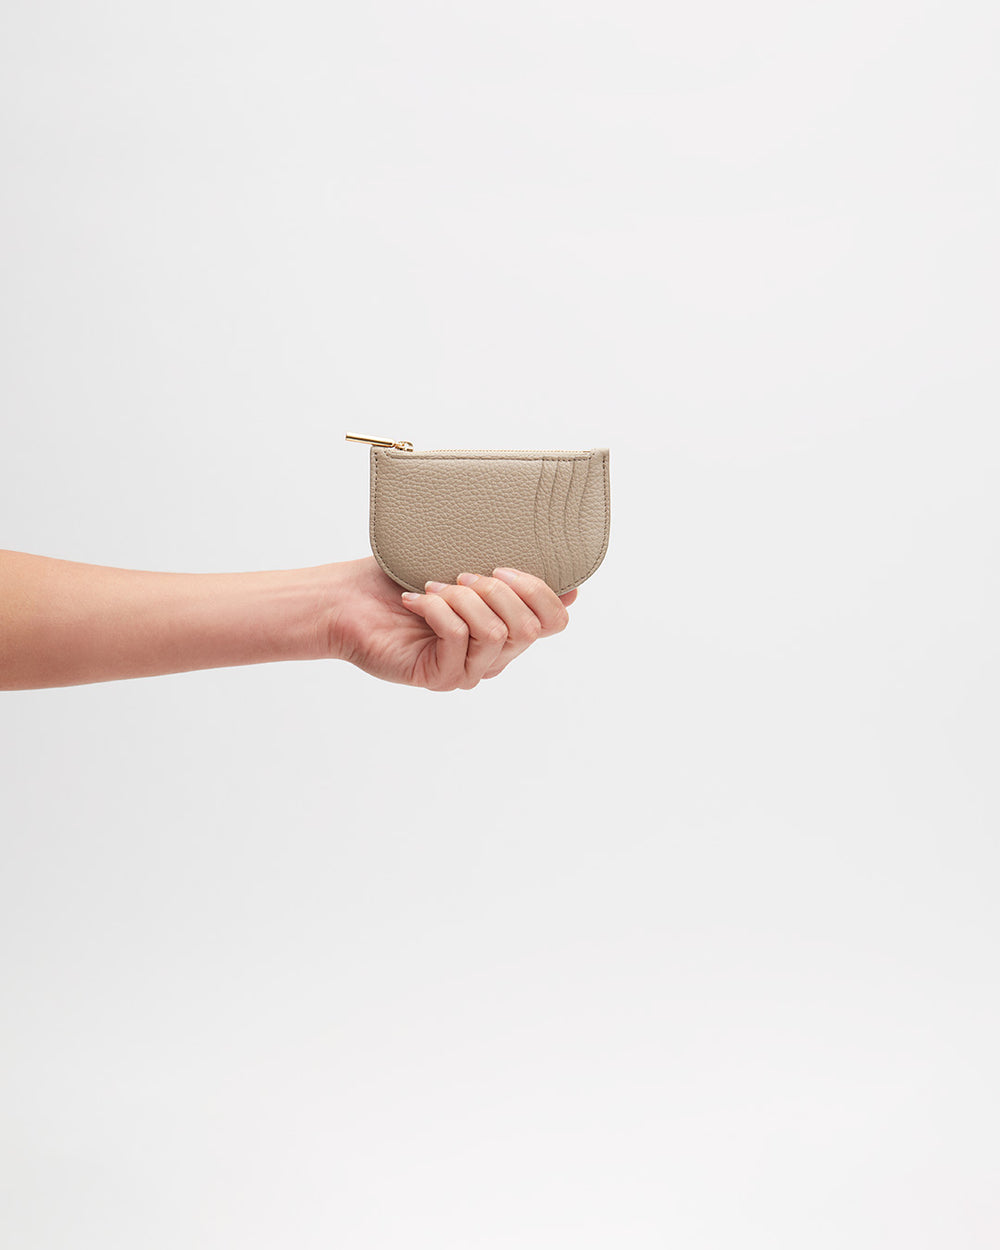 Hand holding a small purse against a light background.